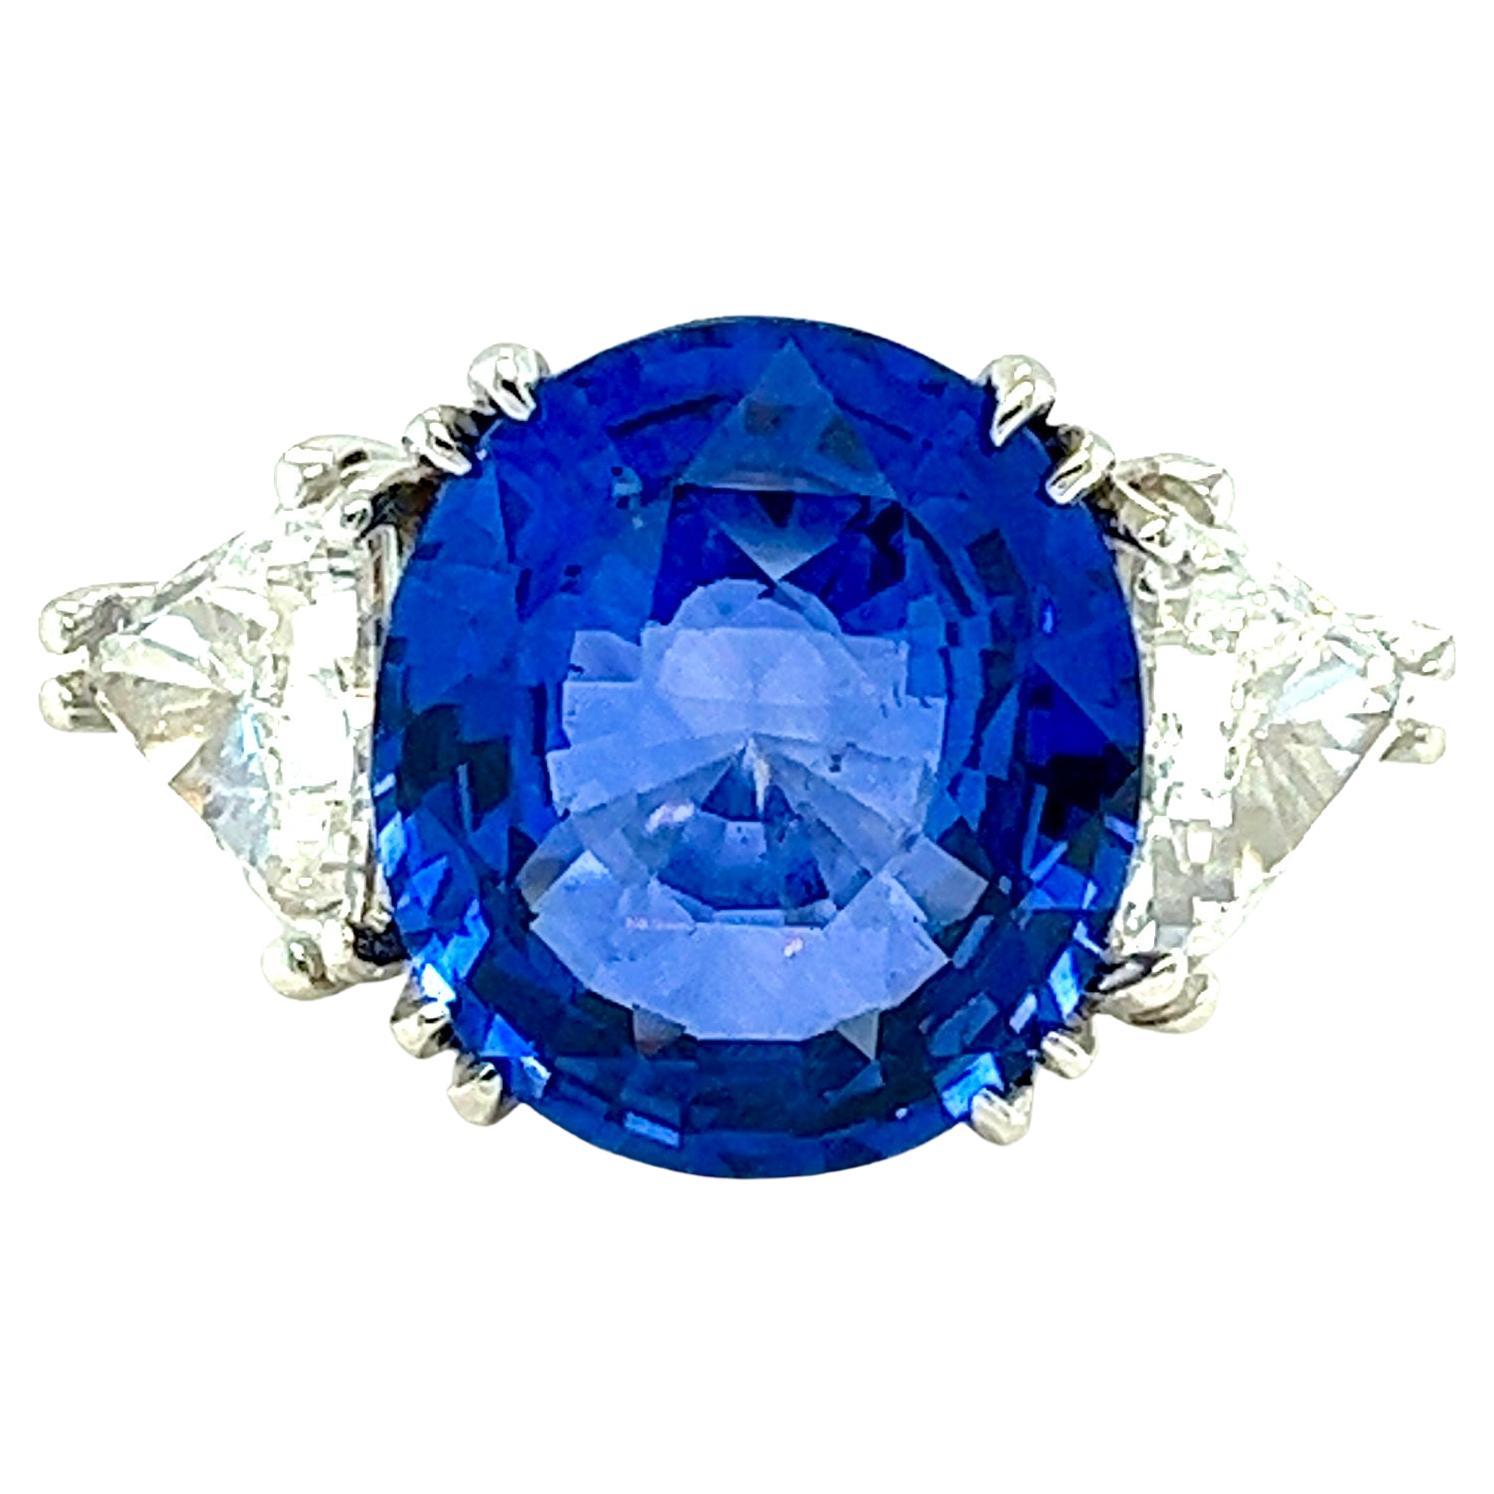 GIA Certified 14.64 Carat Blue Sapphire Diamond Ring For Sale